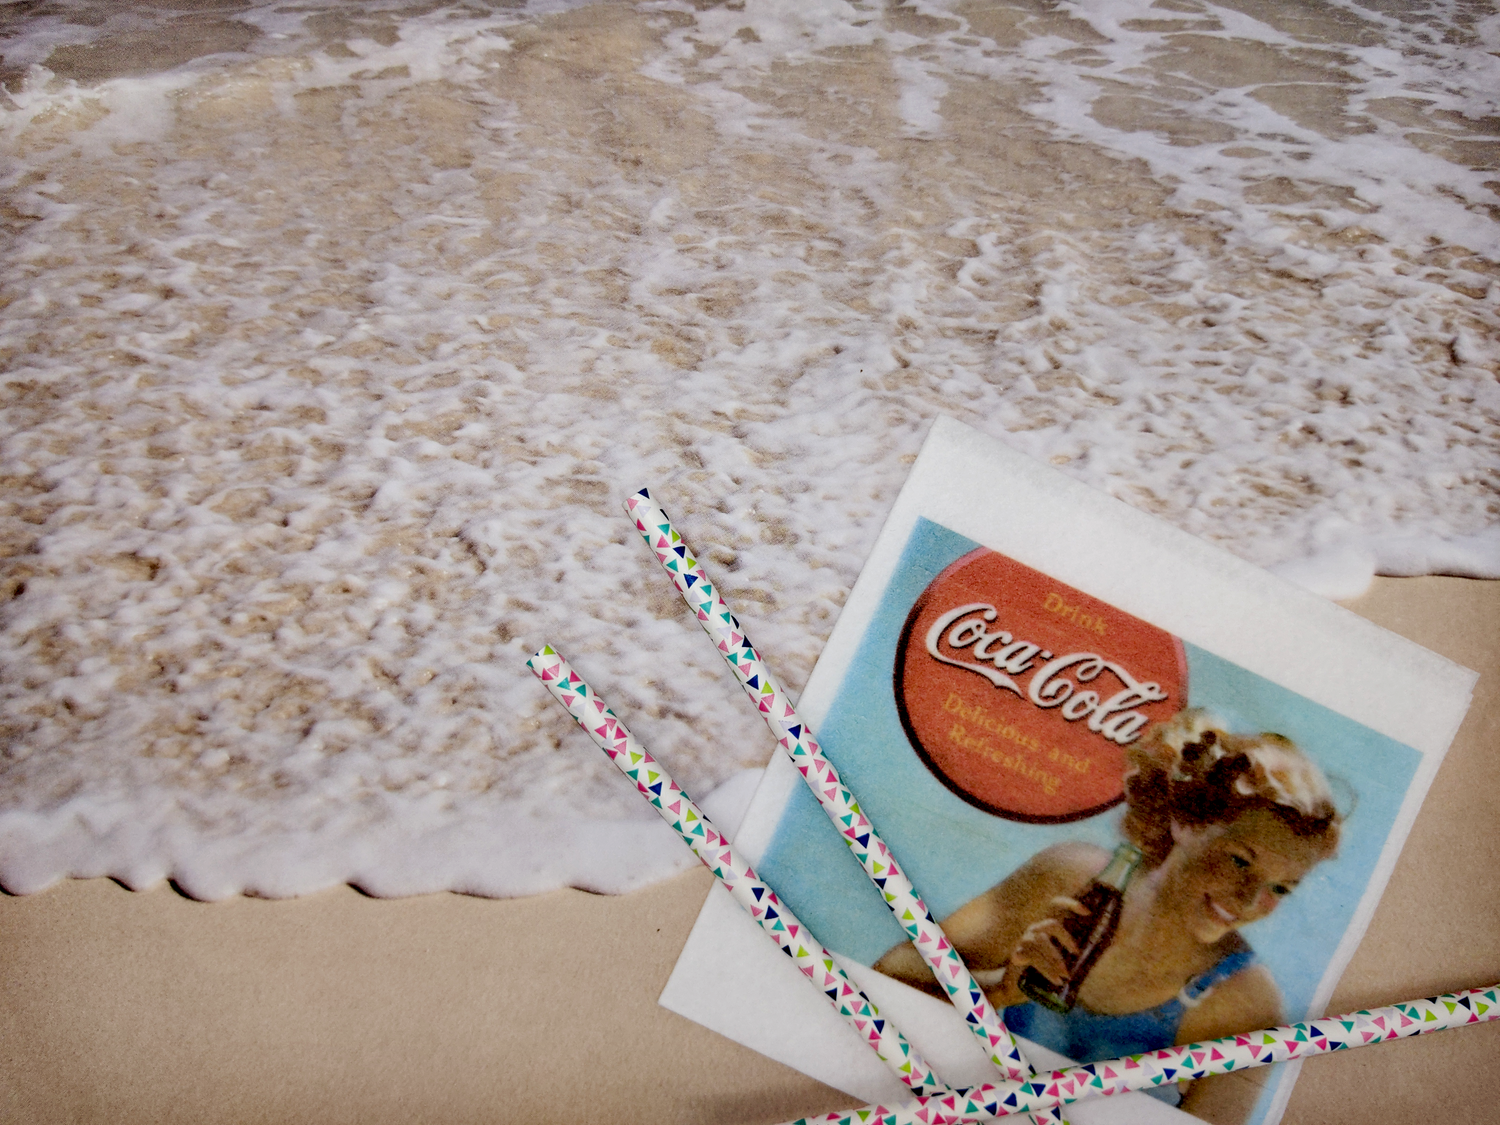 A sandy beach with waves washing up to the shore. A napkin with three colorful straws lays in the foreground, with a full-color print of a mid-1900s Coca-Cola advertisement printed on top.